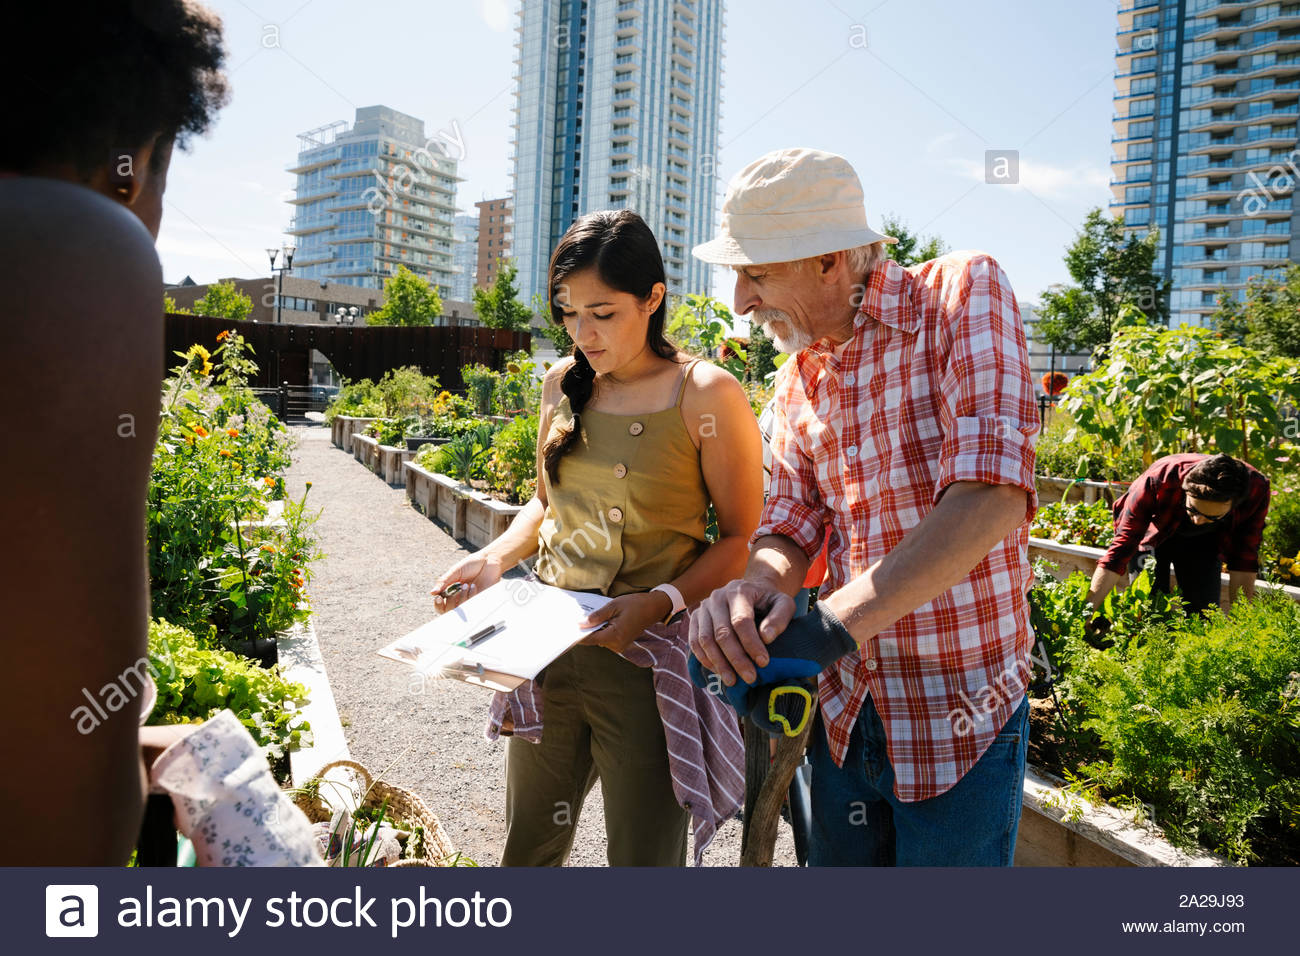 Man and woman planning with clipboard in sunny, urban community garden Stock Photo